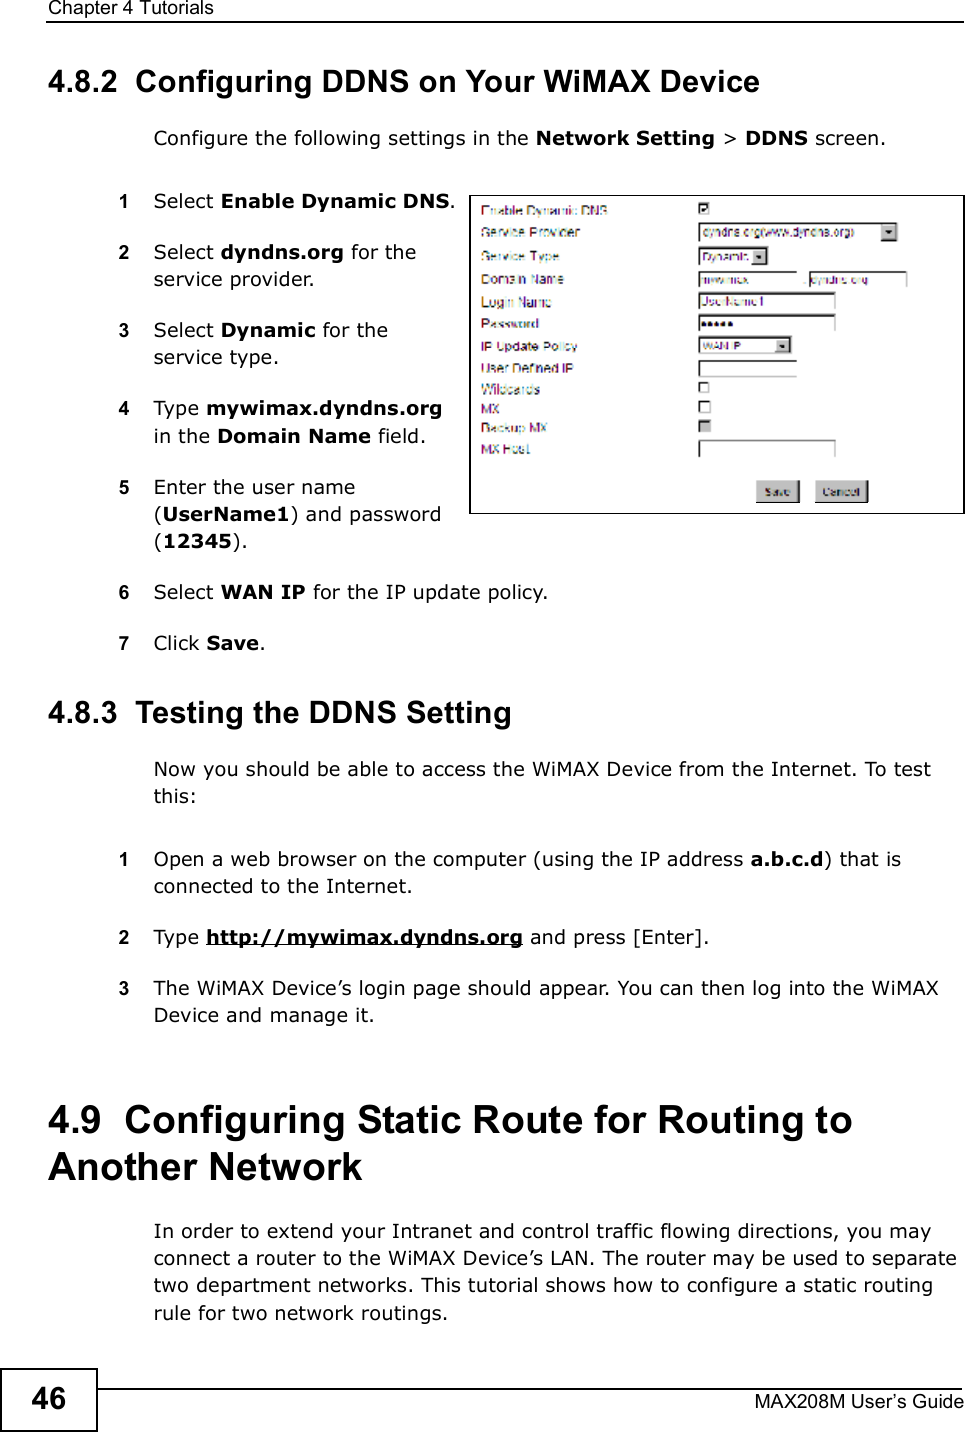 Chapter 4TutorialsMAX208M User s Guide464.8.2  Configuring DDNS on Your WiMAX DeviceConfigure the following settings in the Network Setting &gt; DDNS screen.1Select Enable Dynamic DNS.2Select dyndns.org for the service provider.3Select Dynamic for the service type.4Type mywimax.dyndns.org in the Domain Name field.5Enter the user name (UserName1) and password (12345).6Select WAN IP for the IP update policy.7Click Save.4.8.3  Testing the DDNS SettingNow you should be able to access the WiMAX Device from the Internet. To test this:1Open a web browser on the computer (using the IP address a.b.c.d) that is connected to the Internet.2Type http://mywimax.dyndns.org and press [Enter].3The WiMAX Device s login page should appear. You can then log into the WiMAX Device and manage it.4.9  Configuring Static Route for Routing to Another NetworkIn order to extend your Intranet and control traffic flowing directions, you may connect a router to the WiMAX Device s LAN. The router may be used to separate two department networks. This tutorial shows how to configure a static routing rule for two network routings.